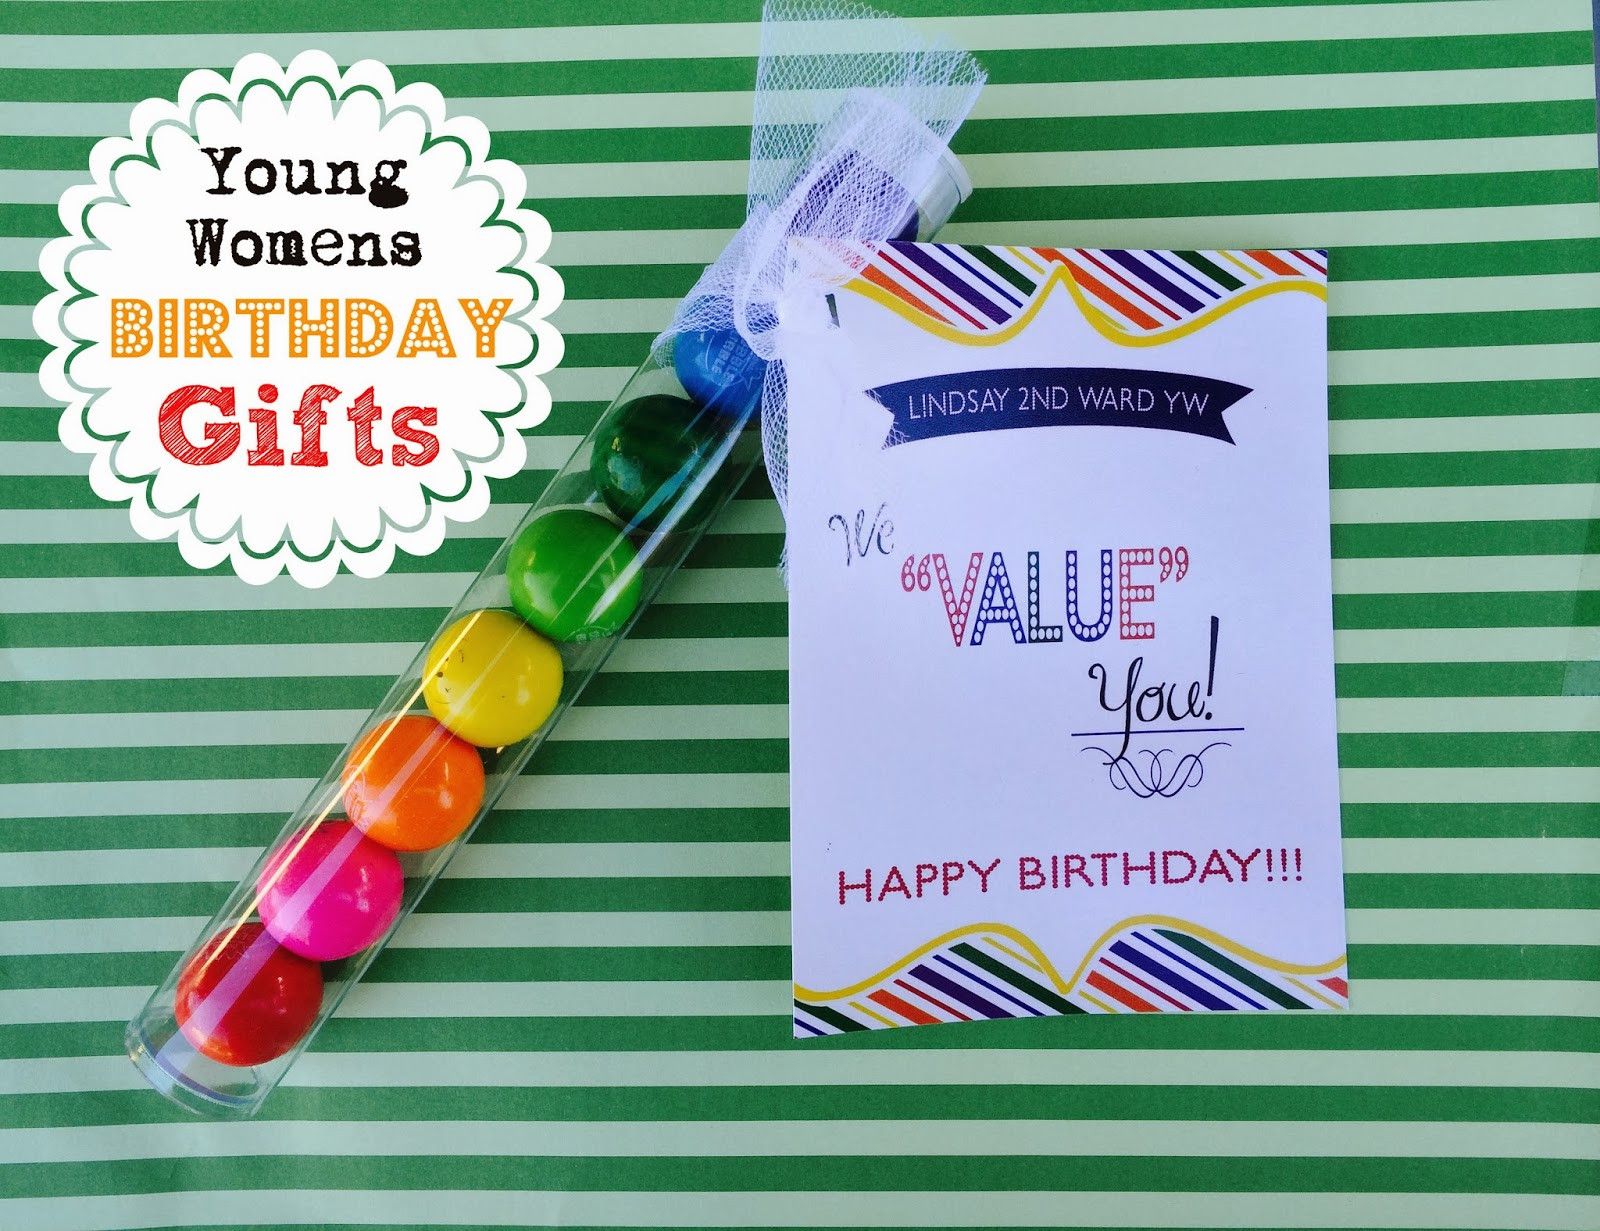 Womens Birthday Gifts
 Marci Coombs Young Womens Birthday Gift idea with FREE